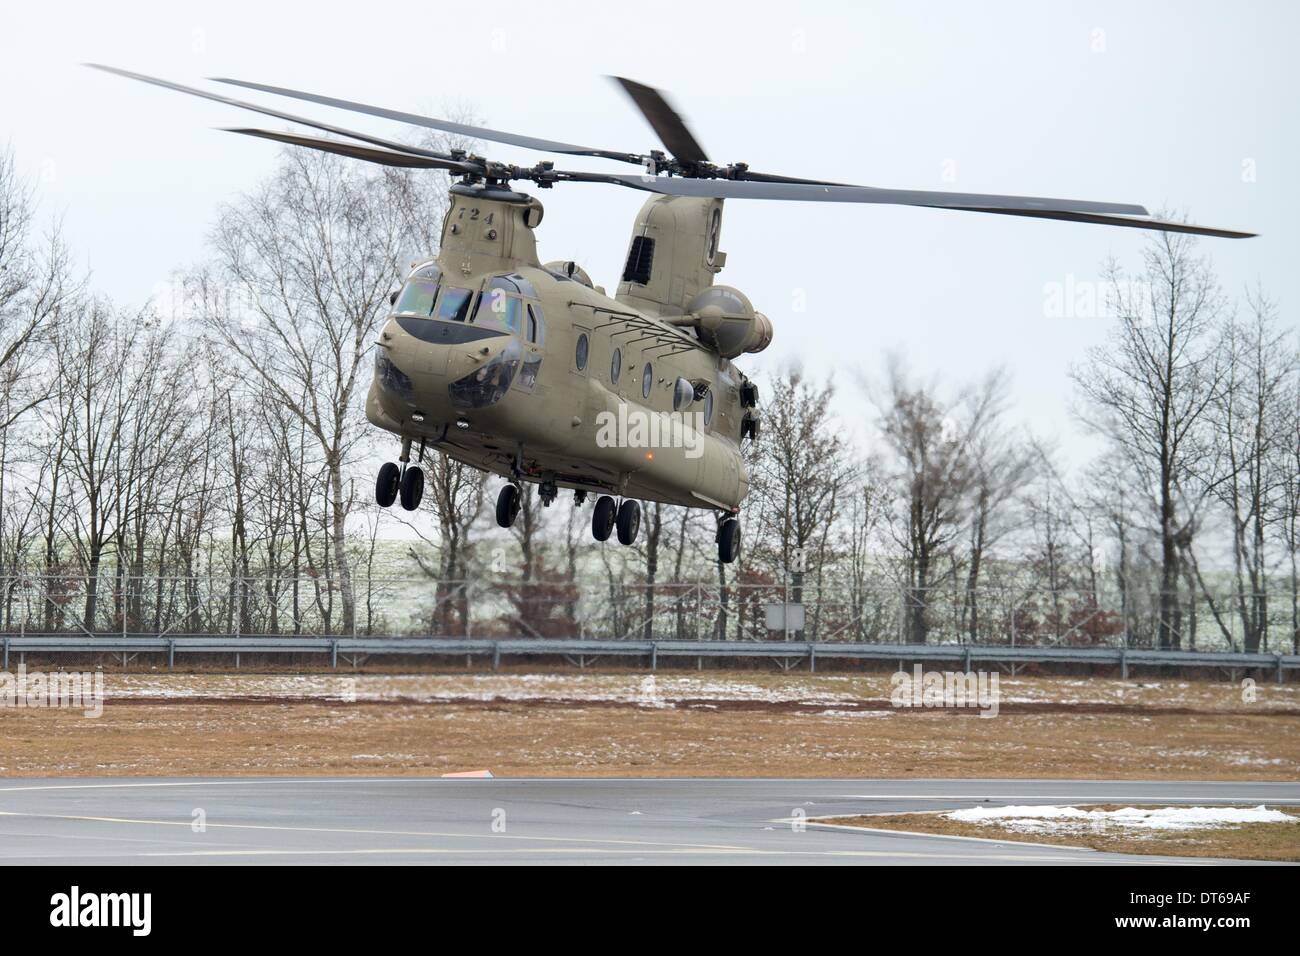 Grafenwoehr, Germany. 10th Feb, 2014. A Boeing CH-47 Chinook helicopter approaches for landing at the training area in Grafenwoehr, Germany, 10 February 2014. About 350 soldiers jumped from about 330 meters above sea level from a military helicopter. The training prepares the 173rd Airborne Brigade for further operations. The unit has already been employed in the war zones in Iraq and Afghanistan. Photo: ARMIN WEIGEL/dpa/Alamy Live News Stock Photo